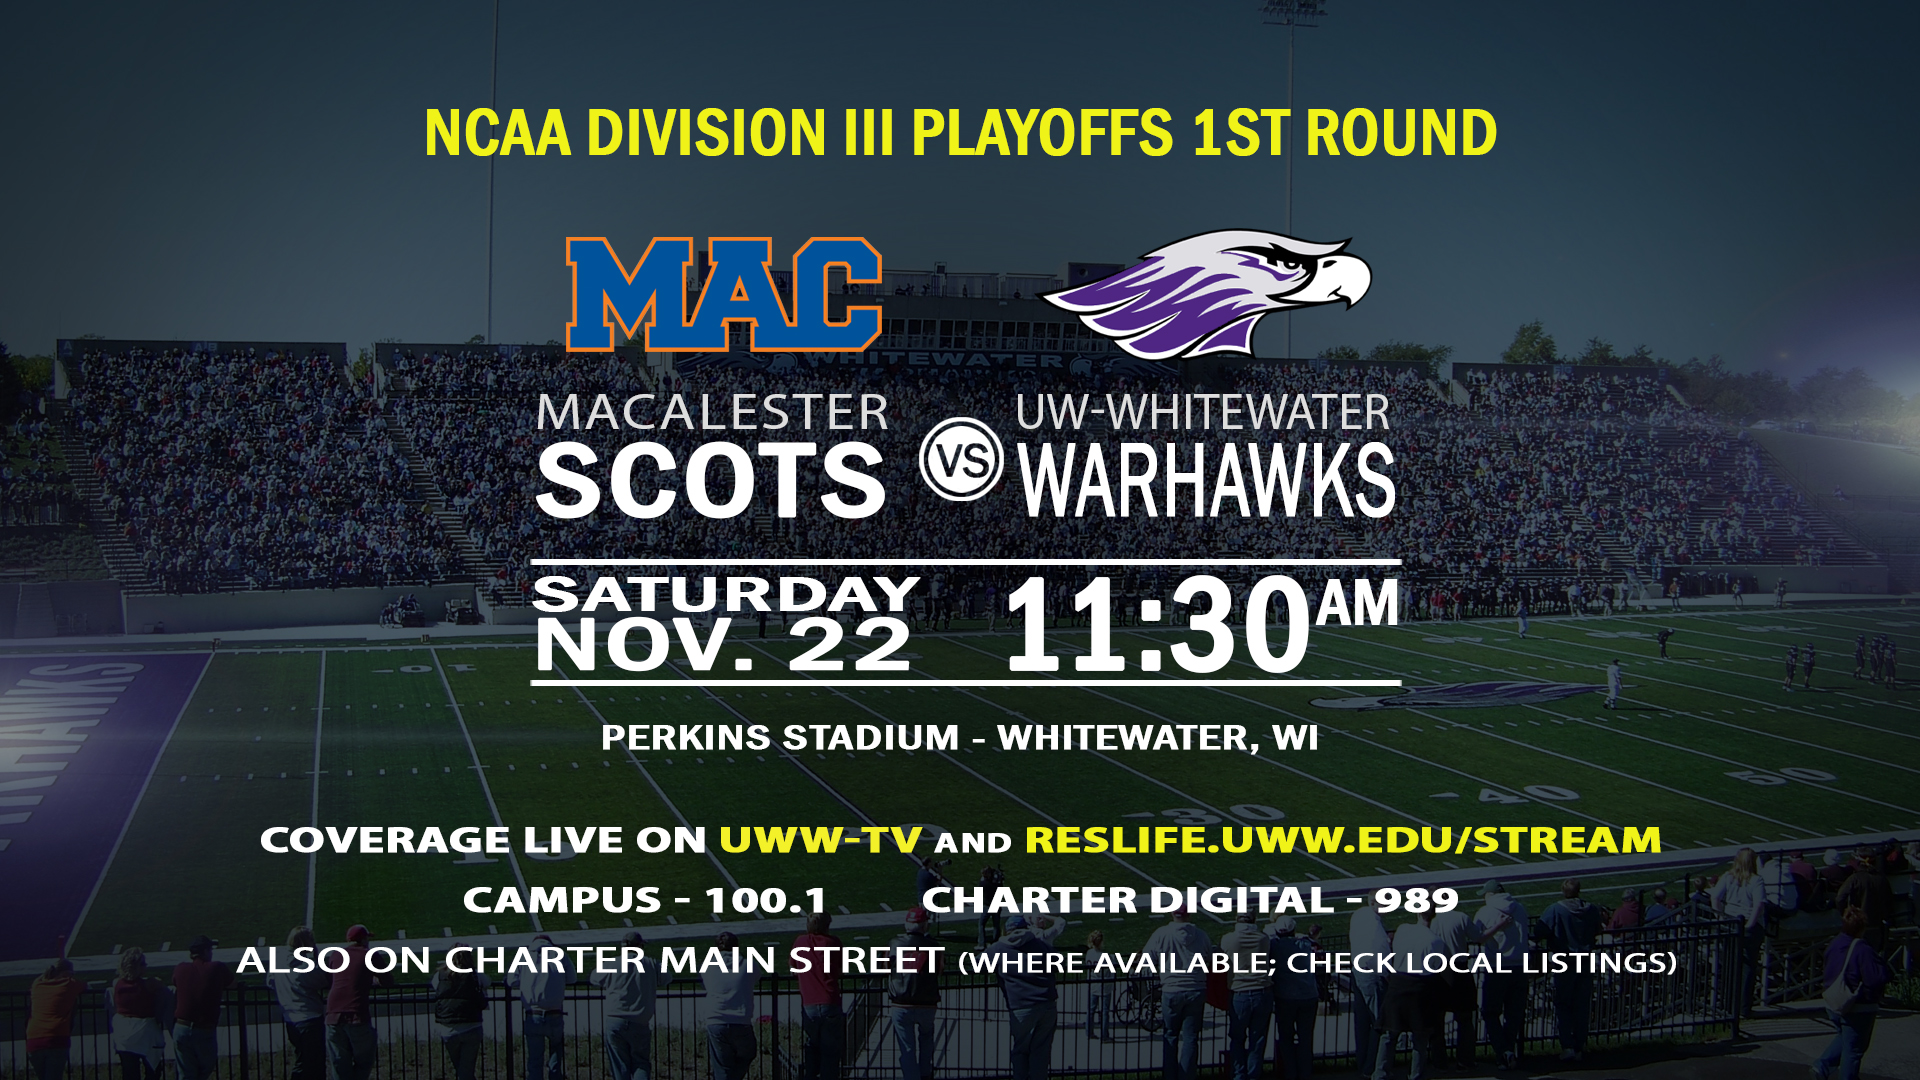 Whitewater To Welcome Macalester In First Round Of D3 Football Playoffs